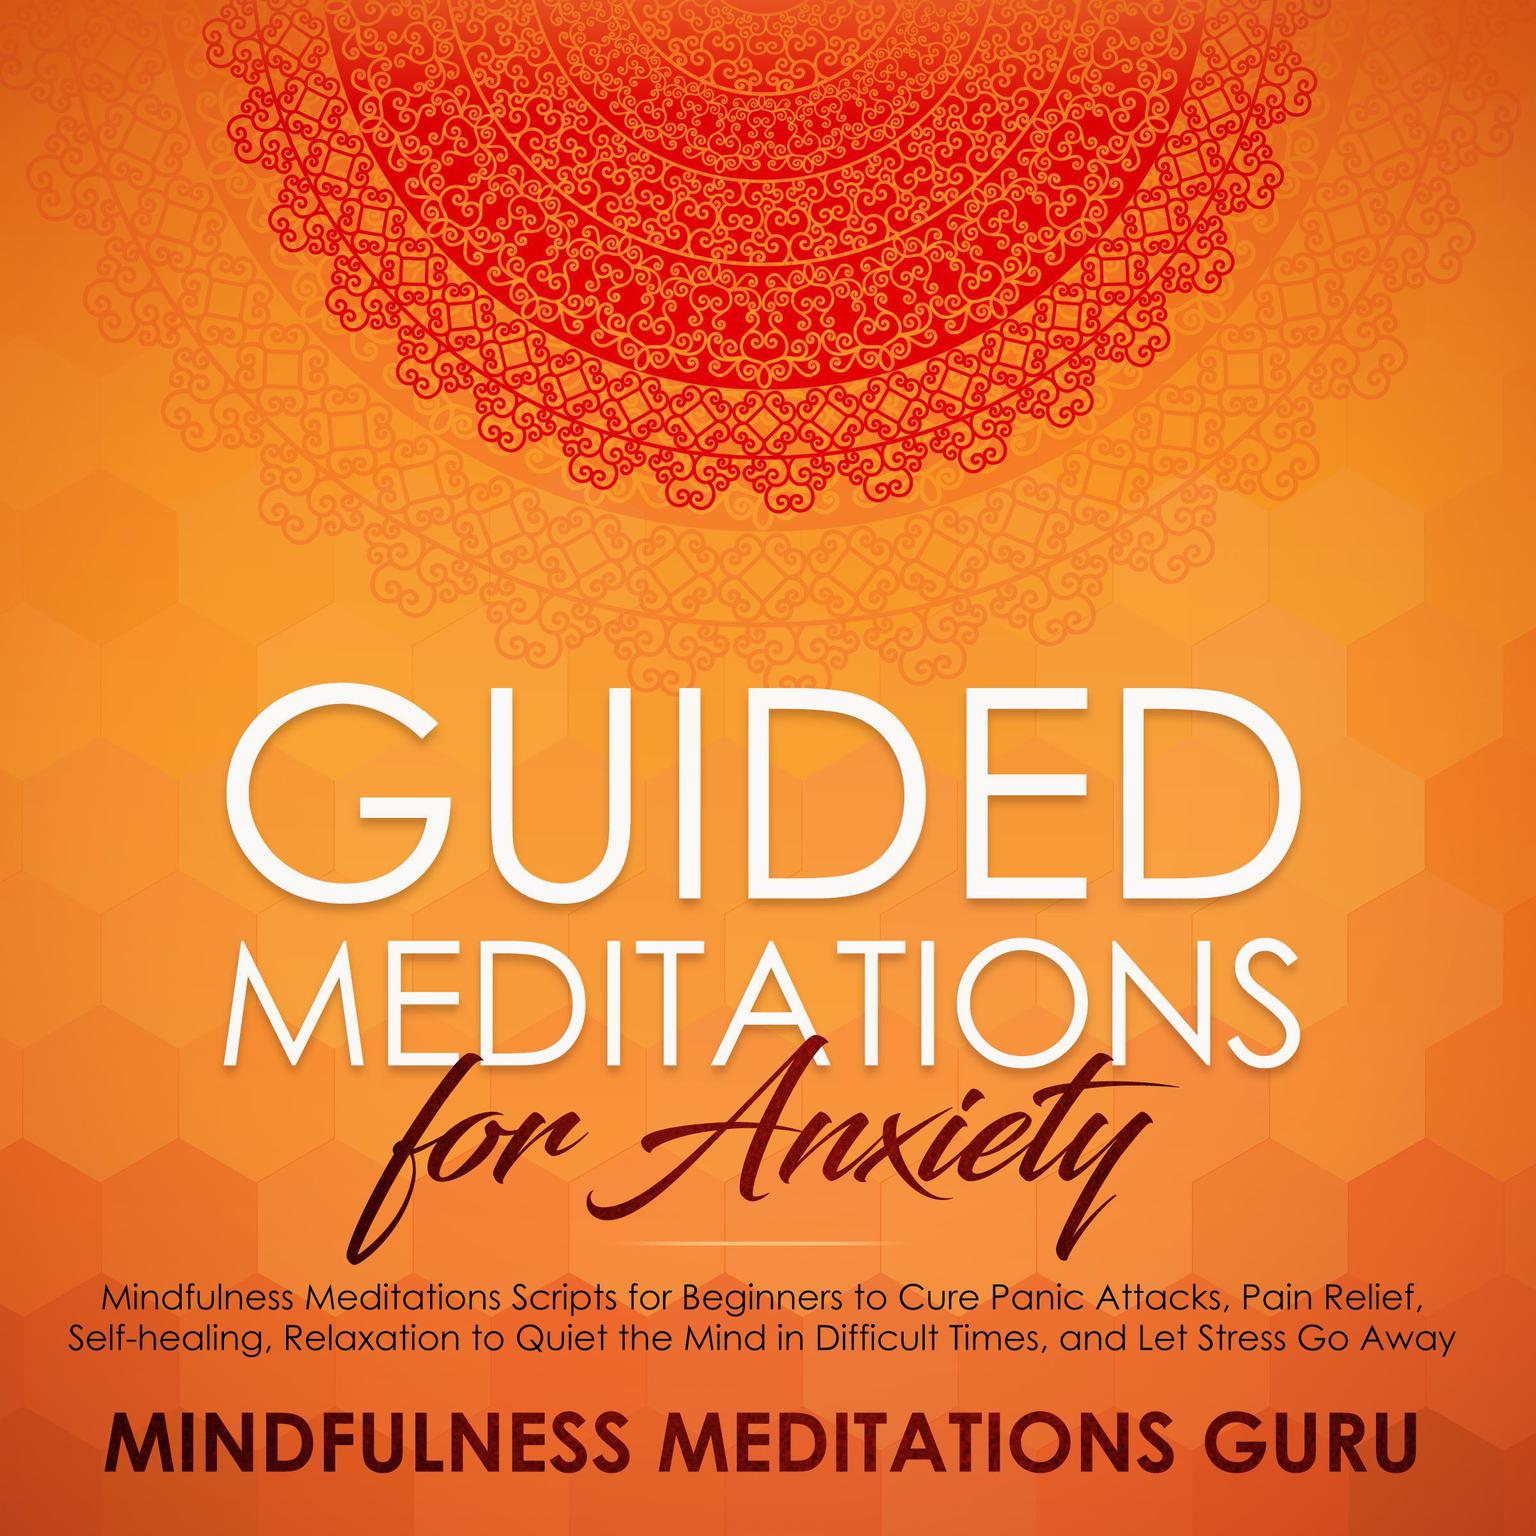 Guided Meditations for Anxiety: Mindfulness Meditations Scripts for Beginners to Cure Panic Attacks, Pain Relief, Self-healing, Relaxation to Quiet the Mind in Difficult Times, and Let Stress Go Away Audiobook, by Mindfulness Meditations Guru